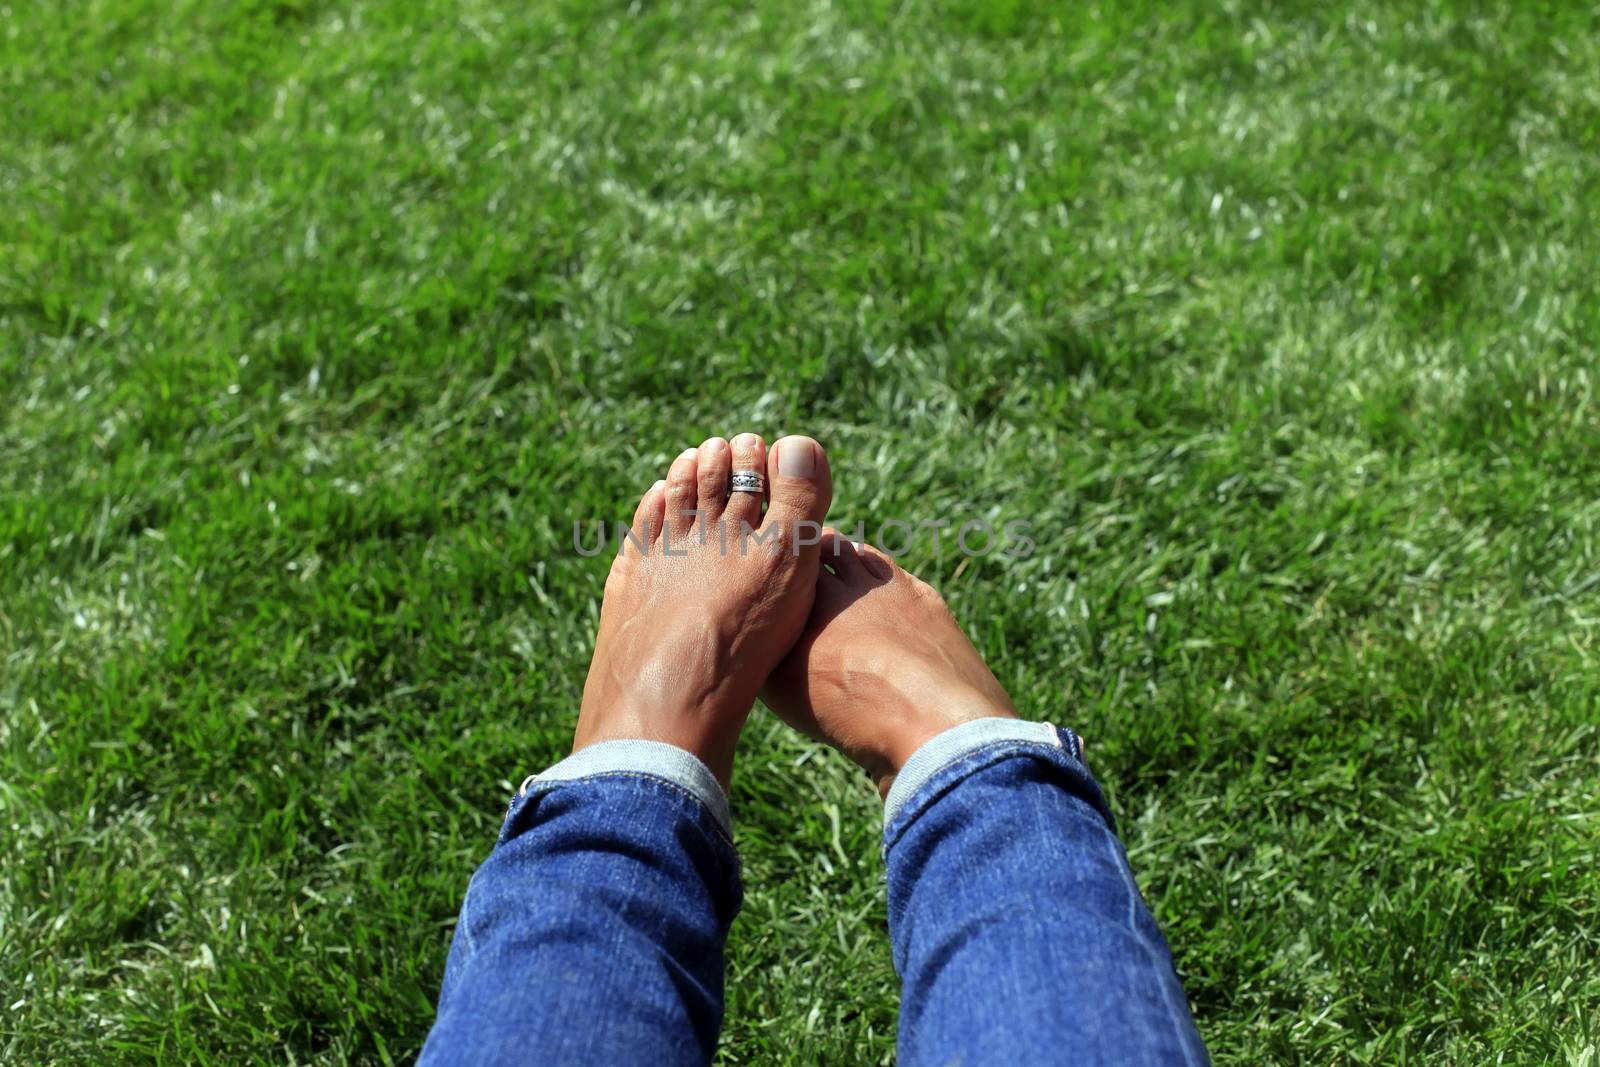 Bare feet in green grass, woman relaxing in nature